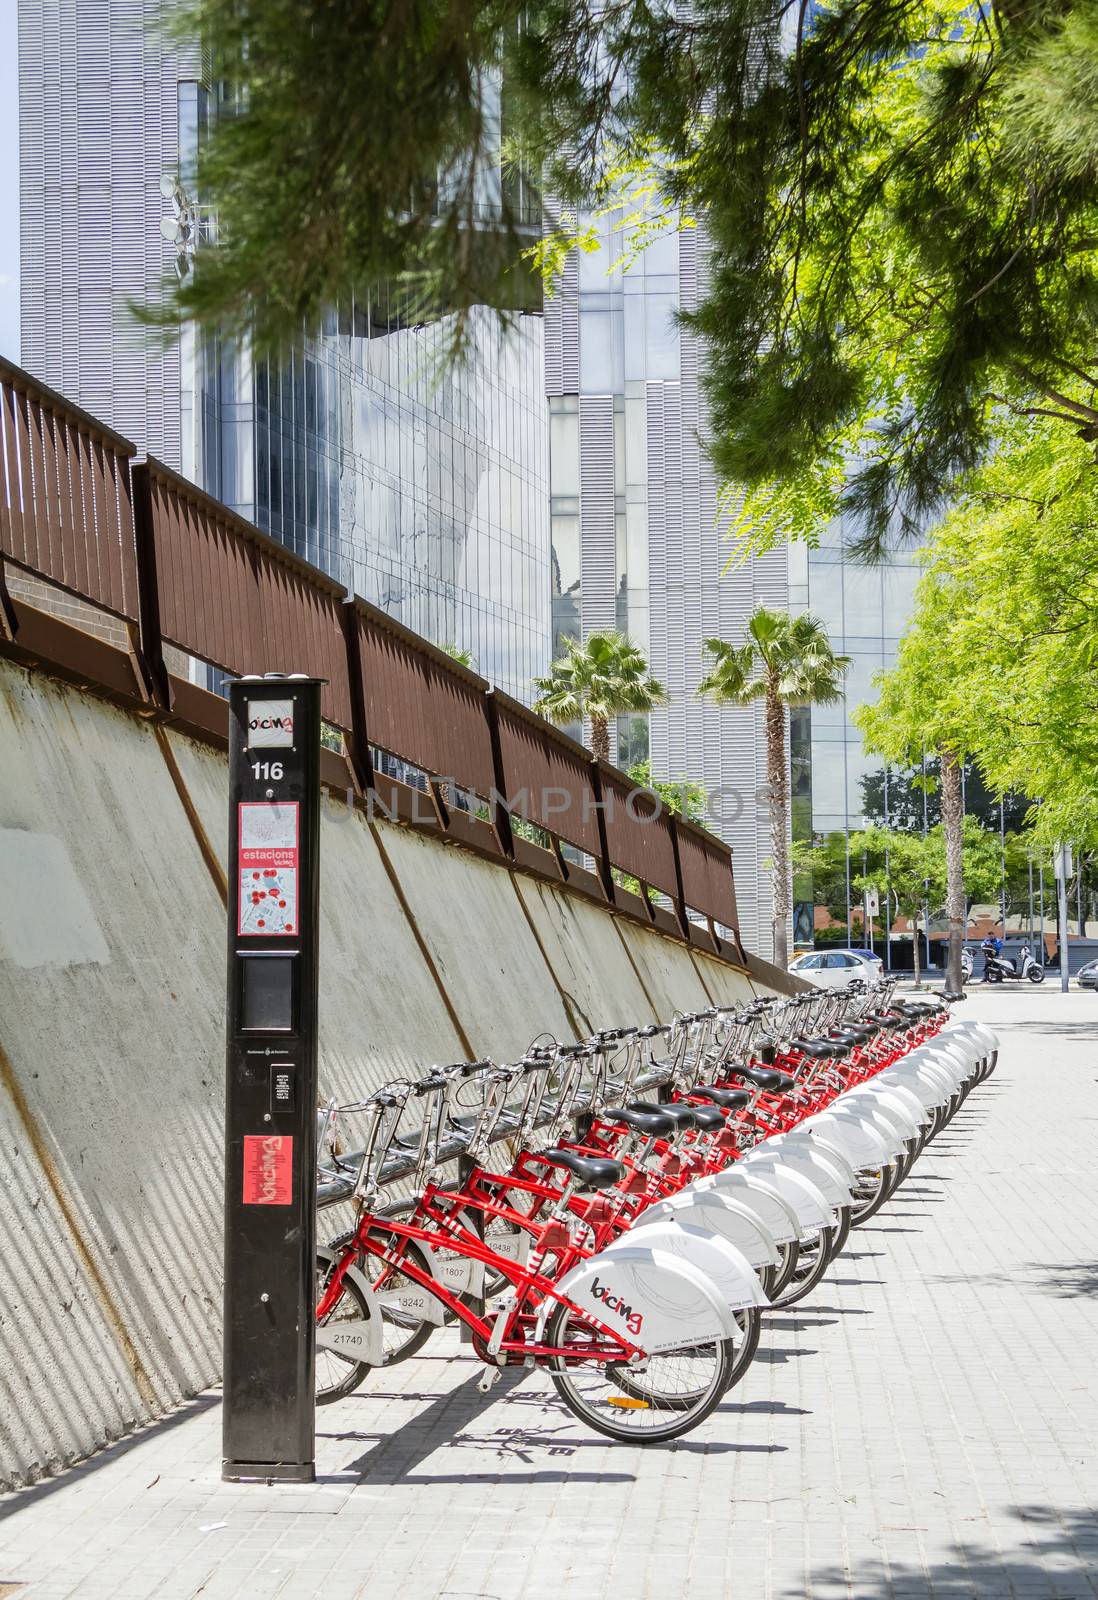 BARCELONA, SPAIN - MAY 30 Public red bicycles parked in a row on the street, in Barcelona, Spain, on May 30, 2013